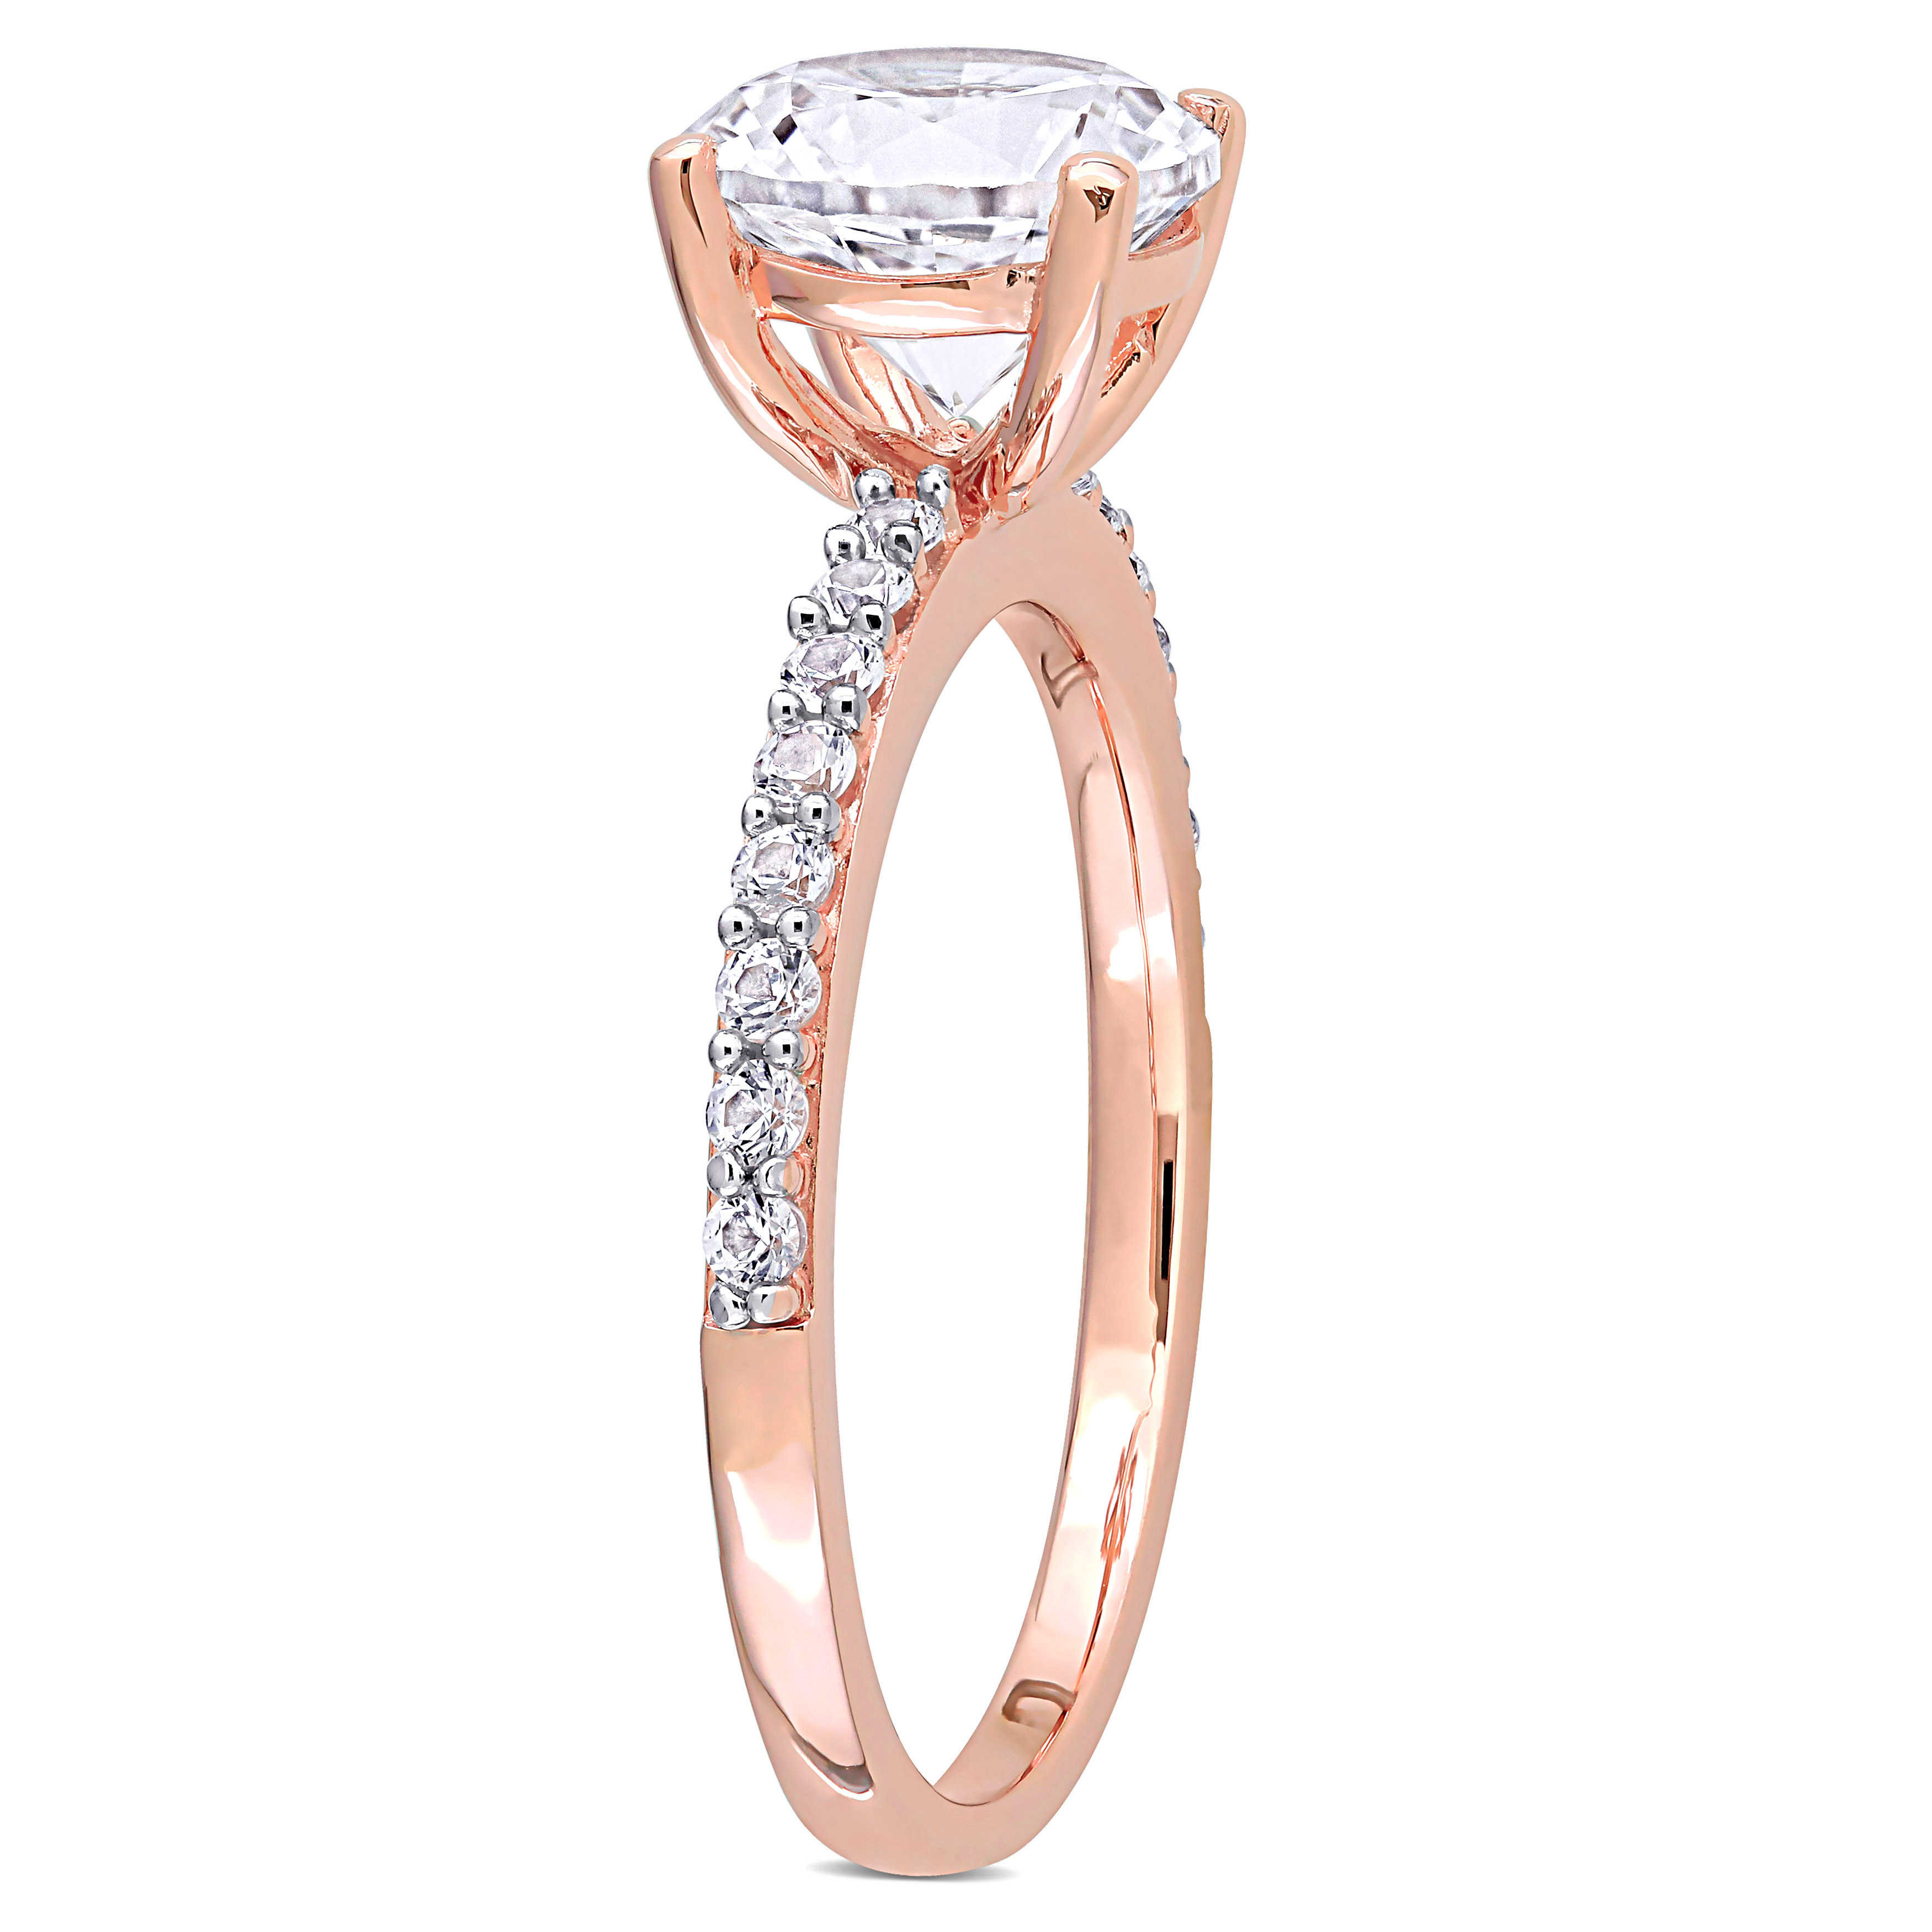 2 3/4 CT TGW Created White Sapphire Solitaire Engagement Ring in 10k Rose Gold